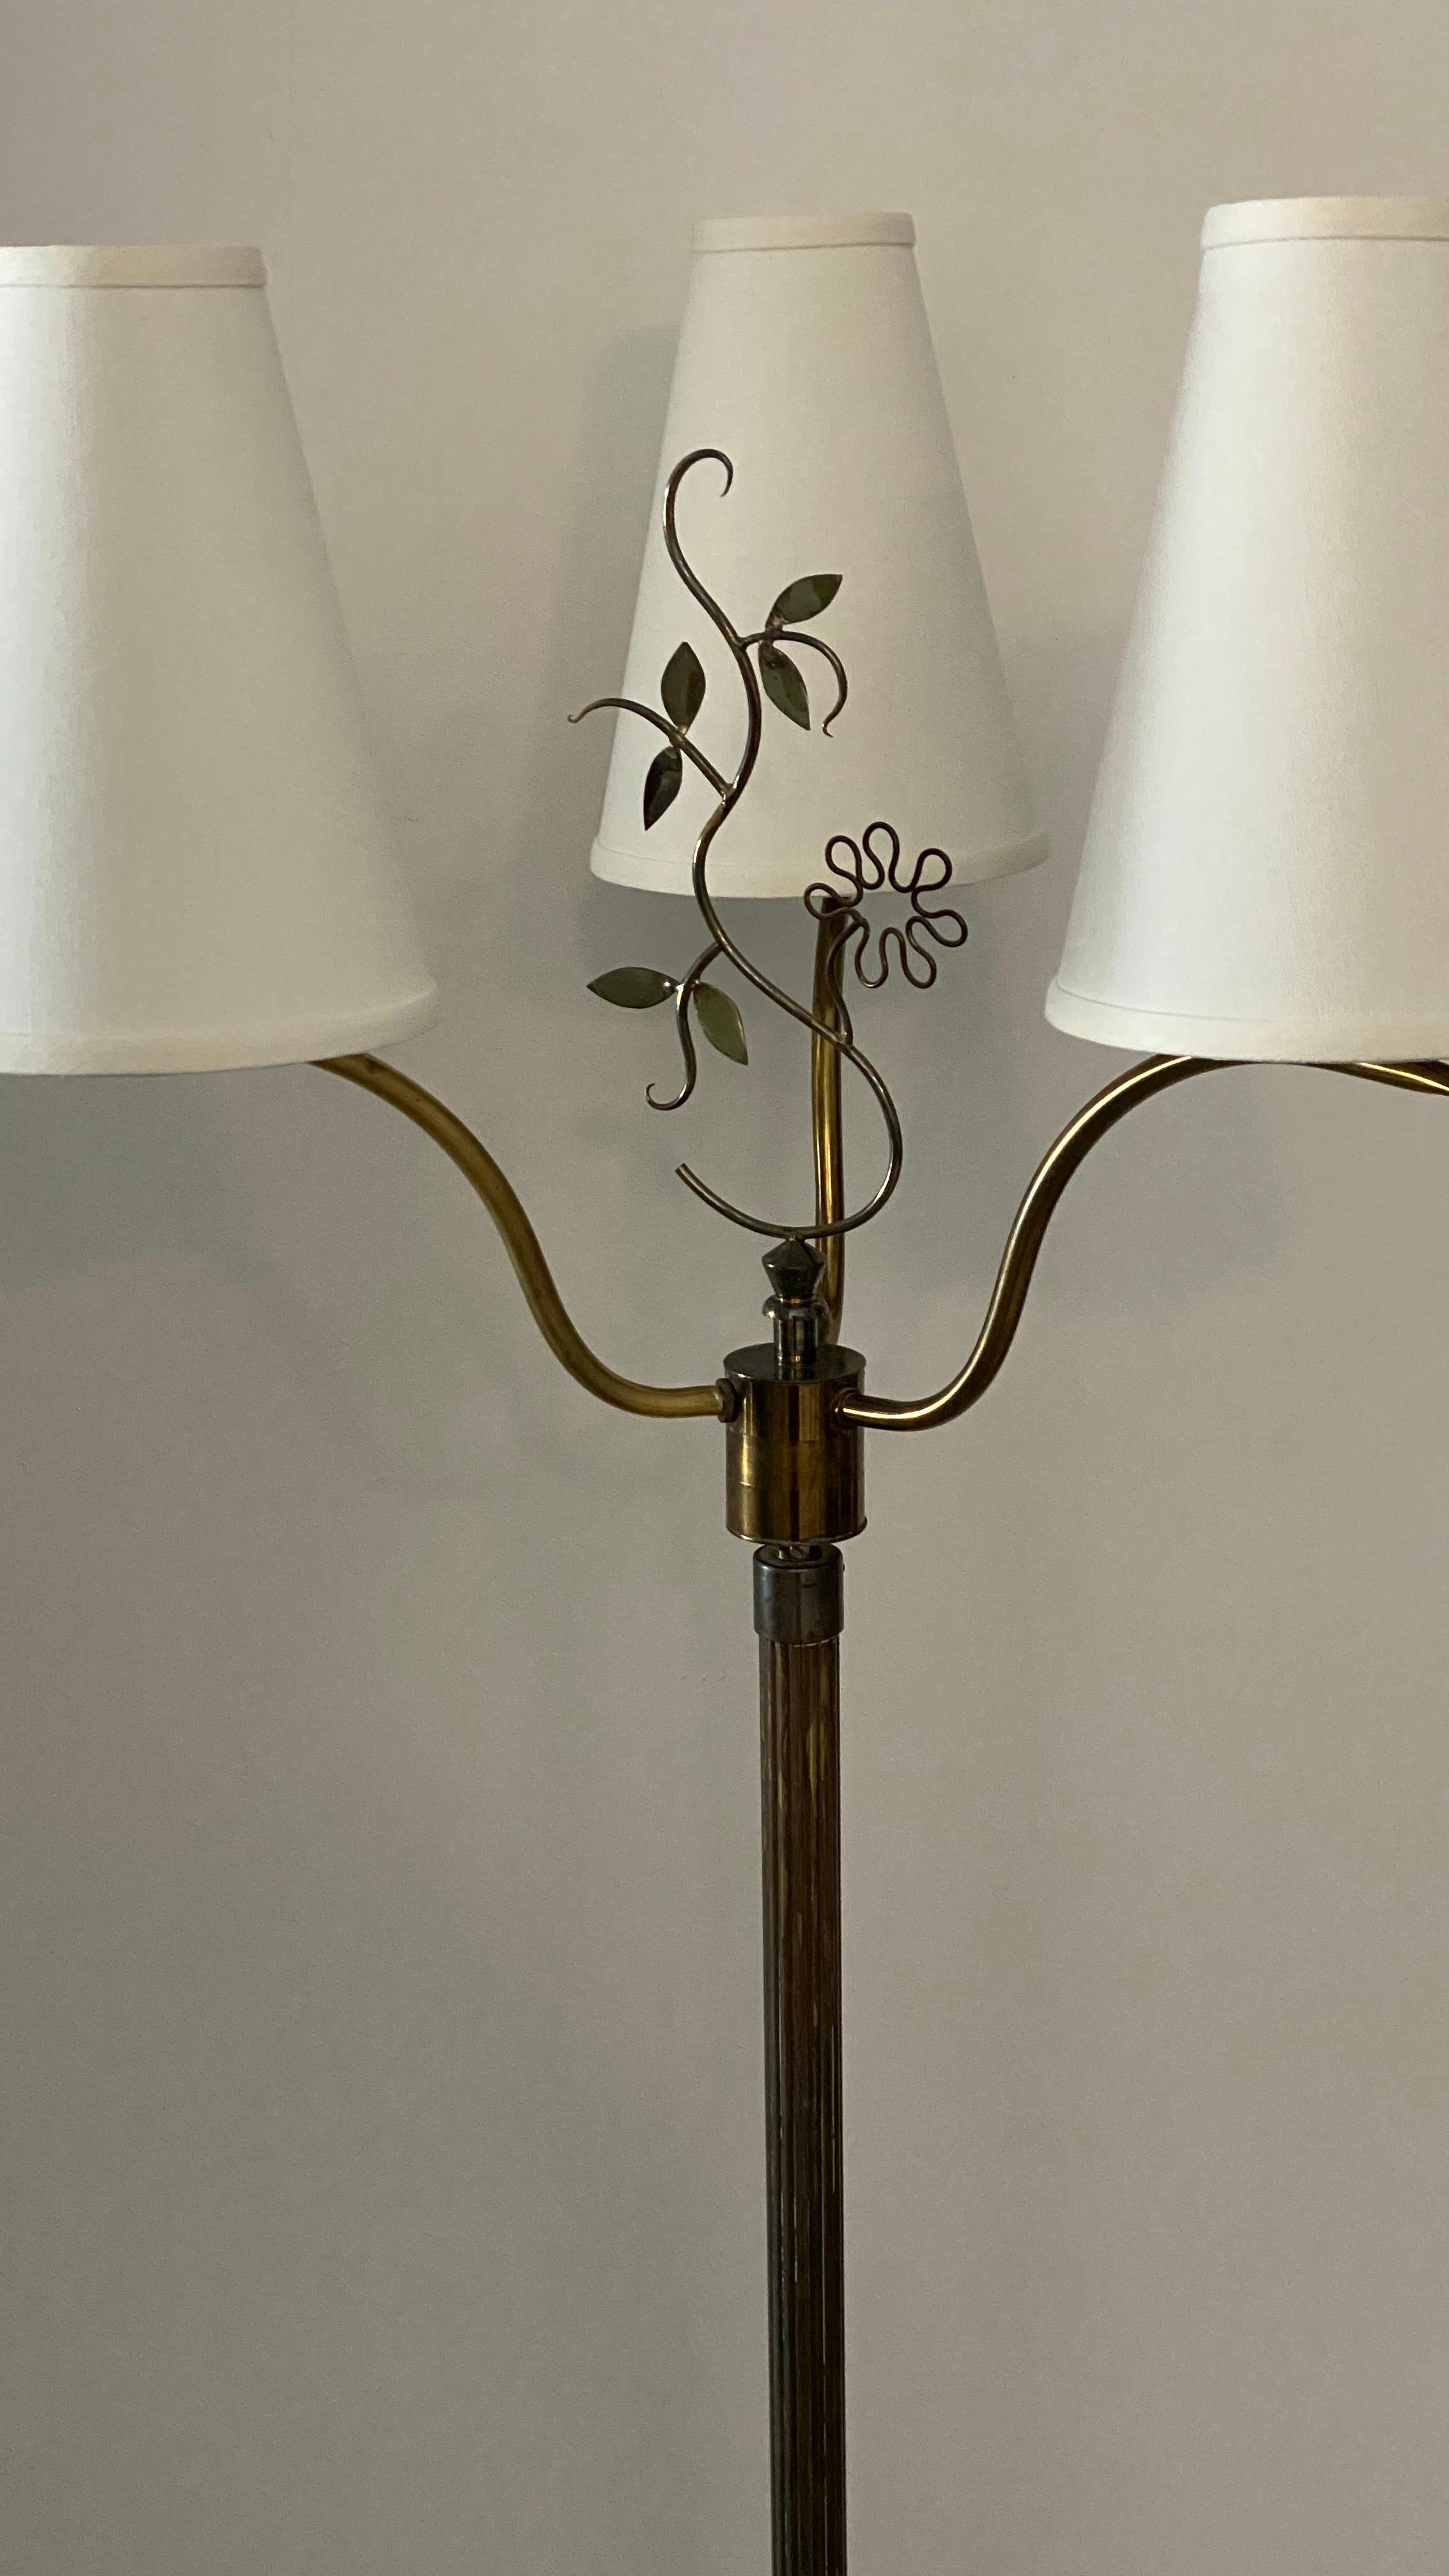 A two armed organic floor lamp. By an unknown Swedish designer and maker. In brass. 

Stated dimensions are without lampshade. Lampshades are not included in purchase.

Other designers working in the organic style include Jean Royere, Alvar